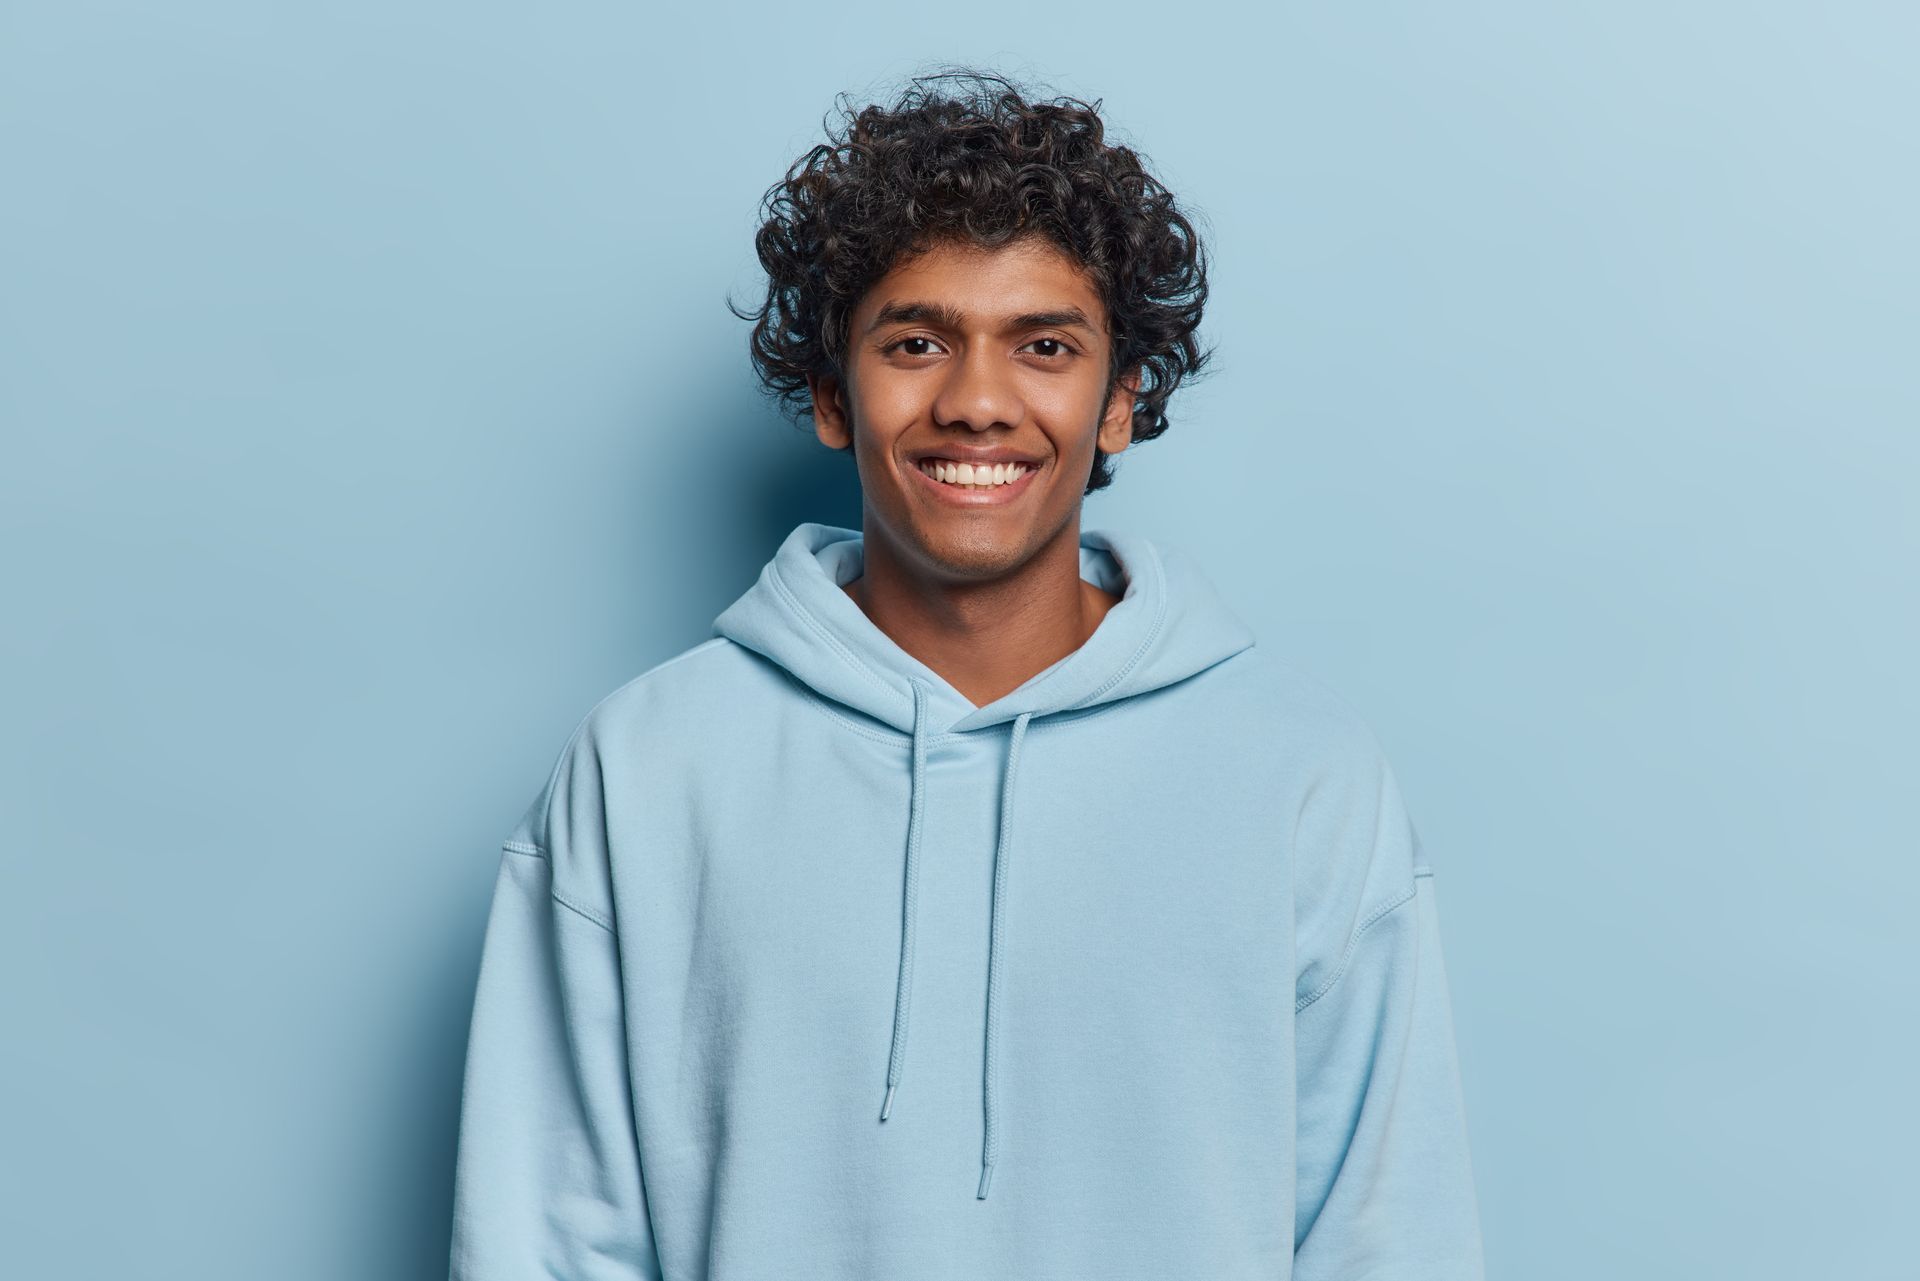 A young man with curly hair is wearing a blue hoodie and smiling.